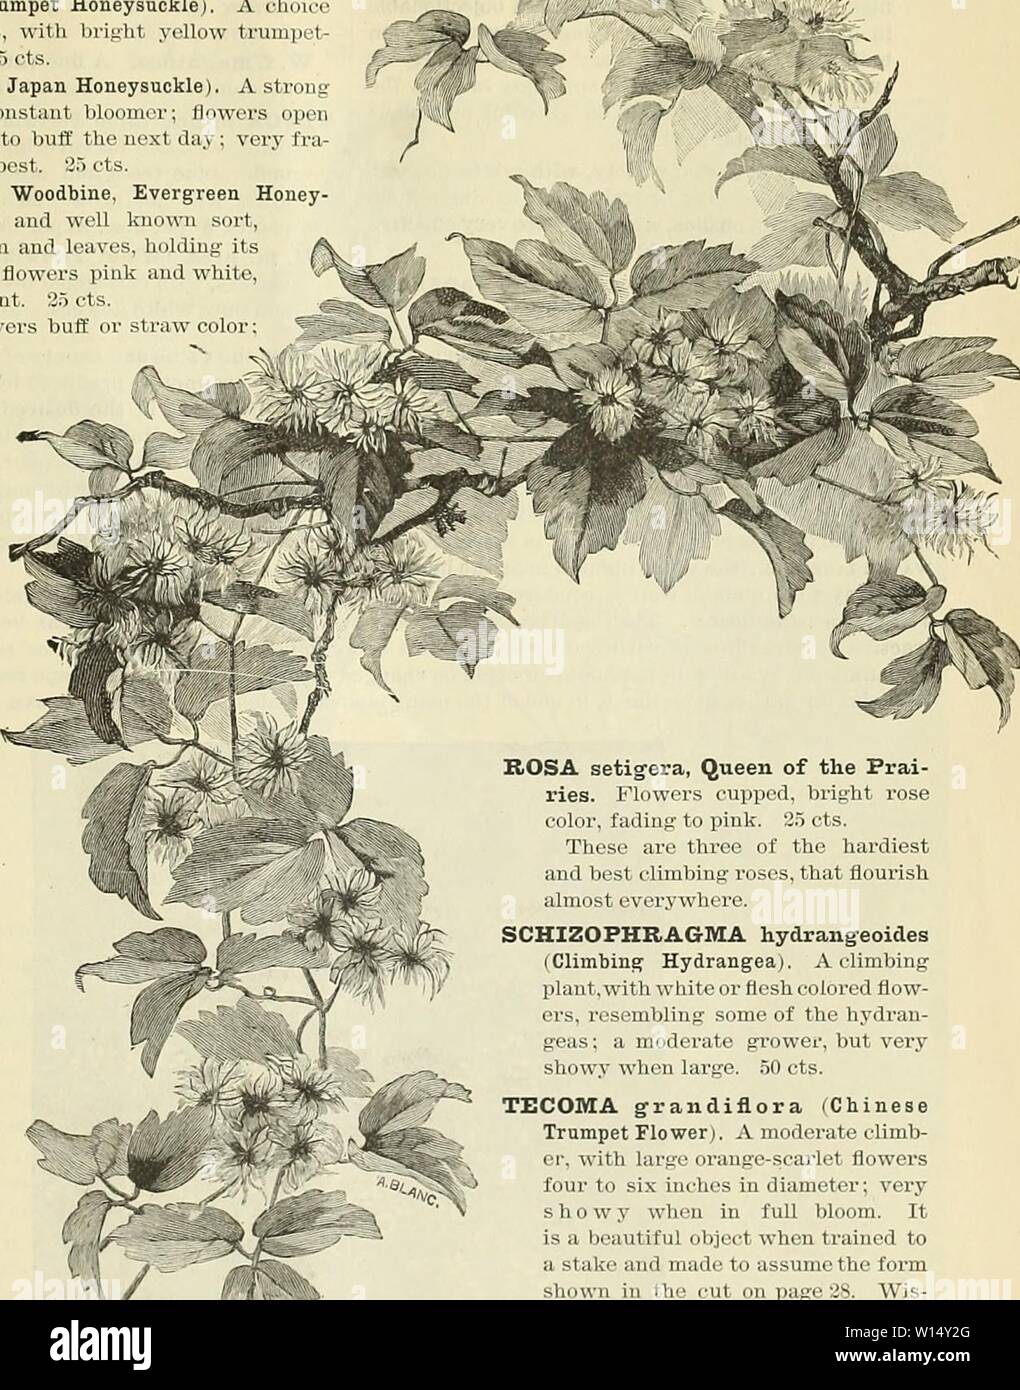 Archive image from page 30 of Descriptive catalogue of ornamental trees. Descriptive catalogue of ornamental trees plants vines fruits, etc. . descriptivecatal1895samu Year: 1895  27 Lonicera, continued. L. flava (Yellow Trumpet Honeysuckle). A choice but scarce species, with bright yellow trumpet- shaped flowers. 35 cts. It. Halleana (Hall's Japan Honeysuckle). A strong grower, and a constant bloomer; flowers open white and change to bull the next day; very fra- grant; one of the best. 25 ots. Ii. Japonica (Pink Woodbine, Evergreen Honey- suckler. A choice and well known sort, with purplish s Stock Photo